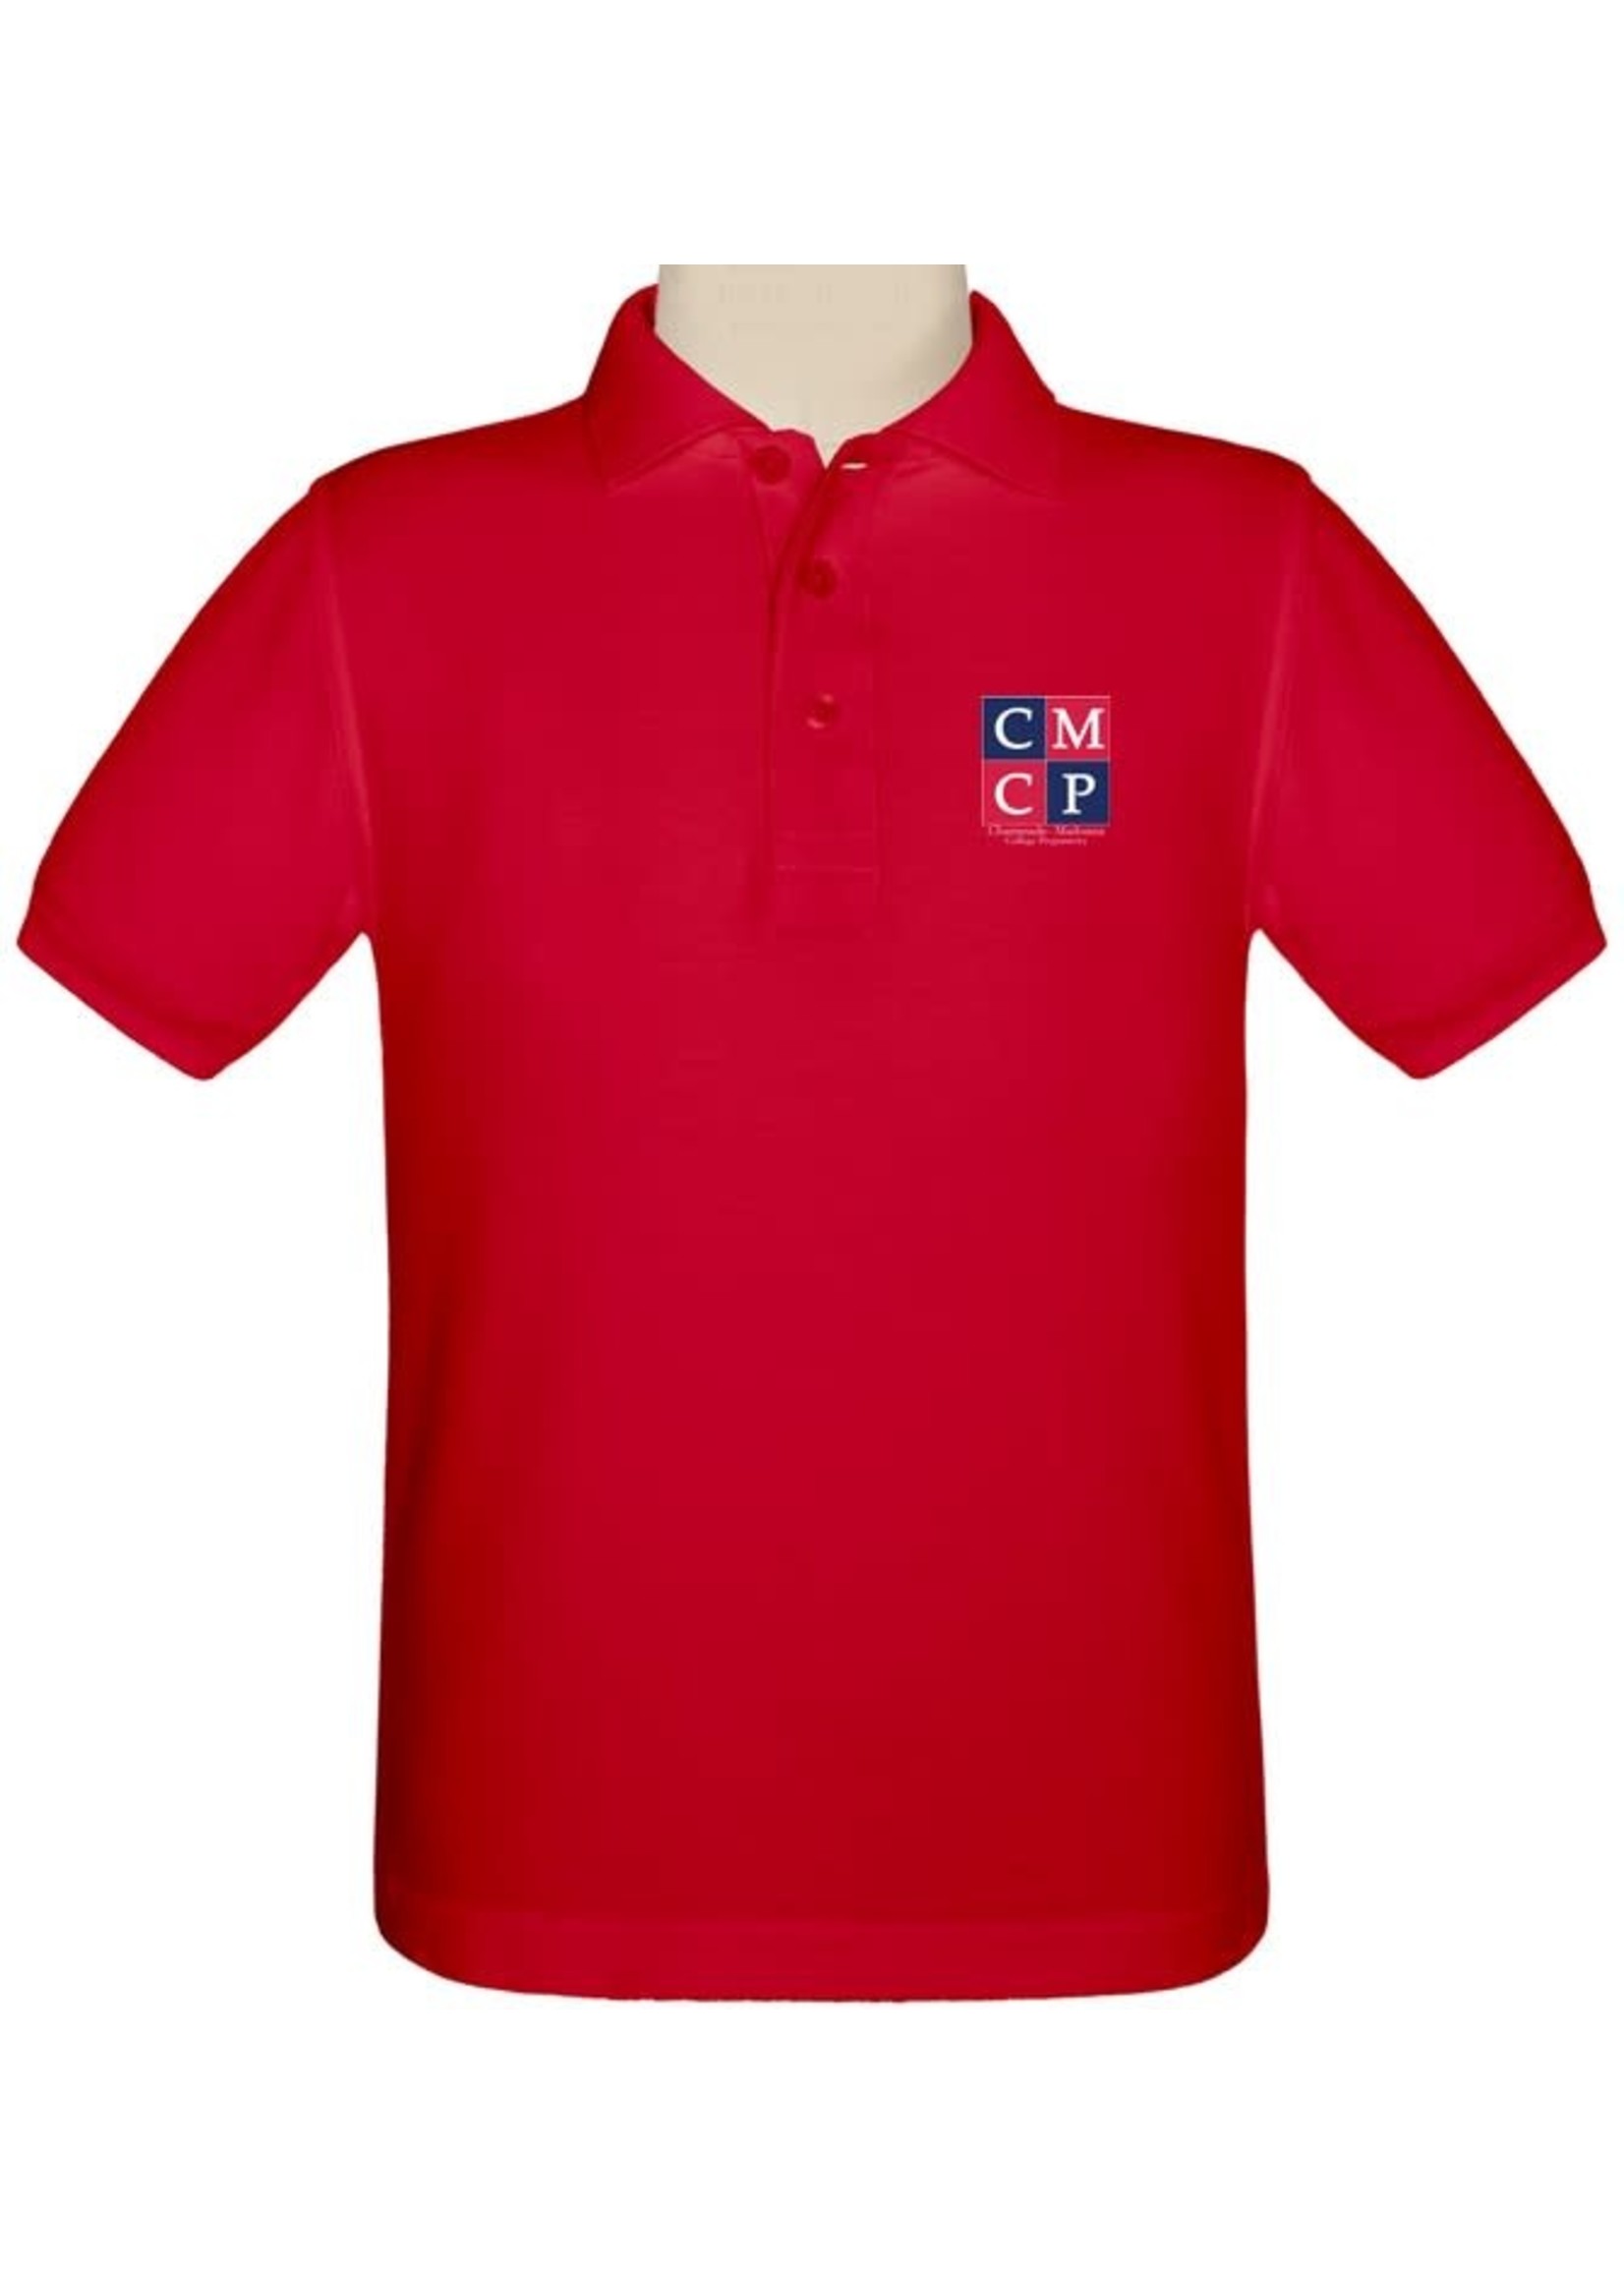 Boys-Dry-Fit-Polo